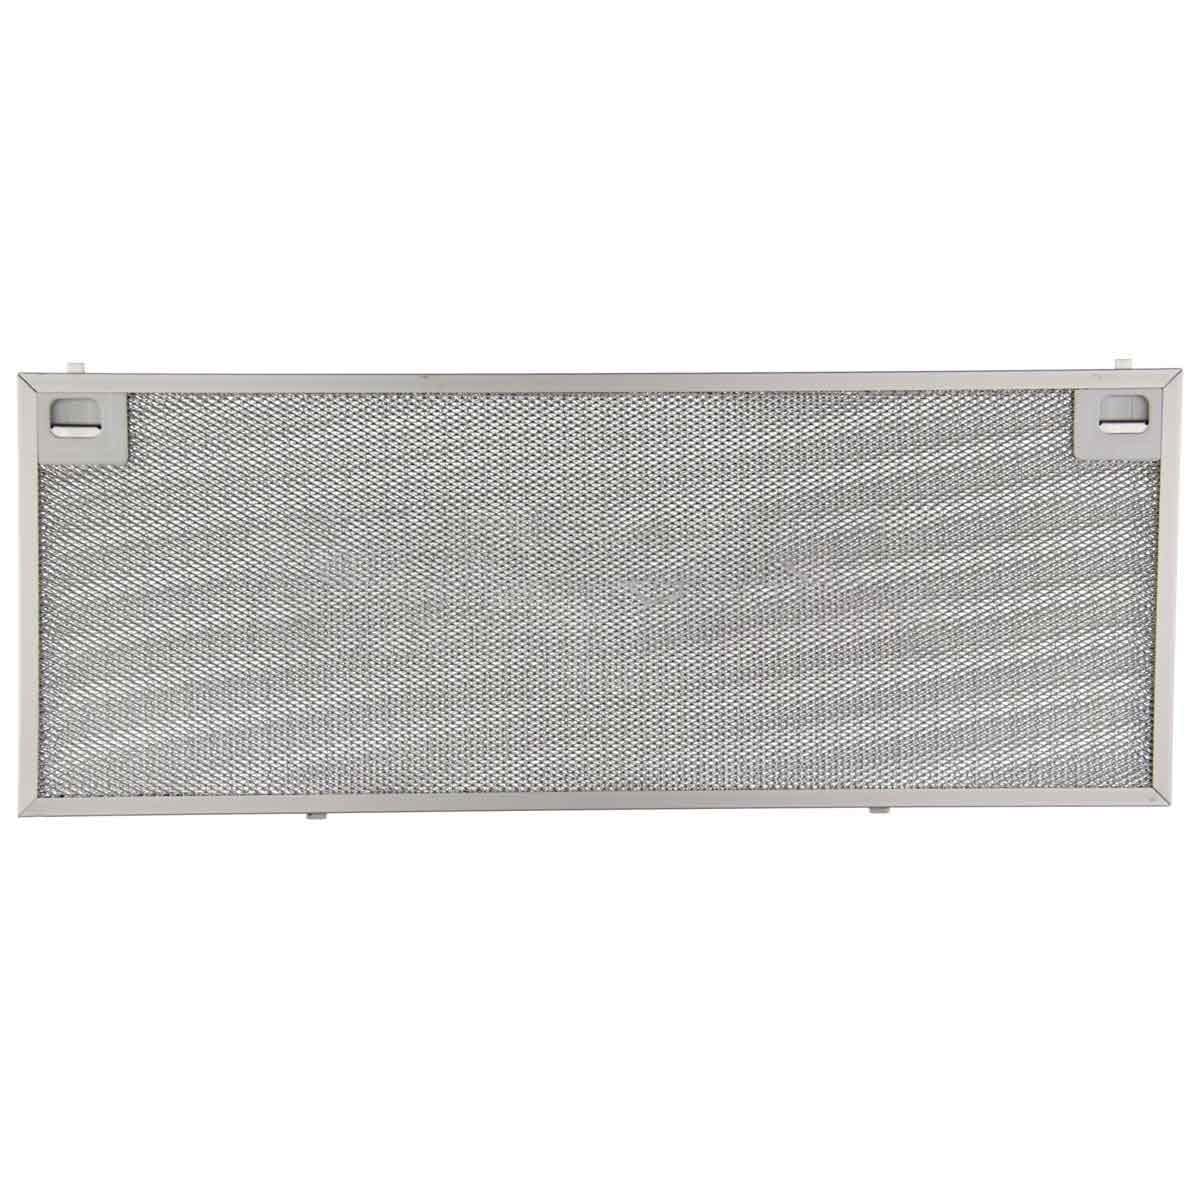 Hood FLOWing filter,orig. FIXED METALLIC FILTER CNL (547X209 MM) Hood filters engines and other parts